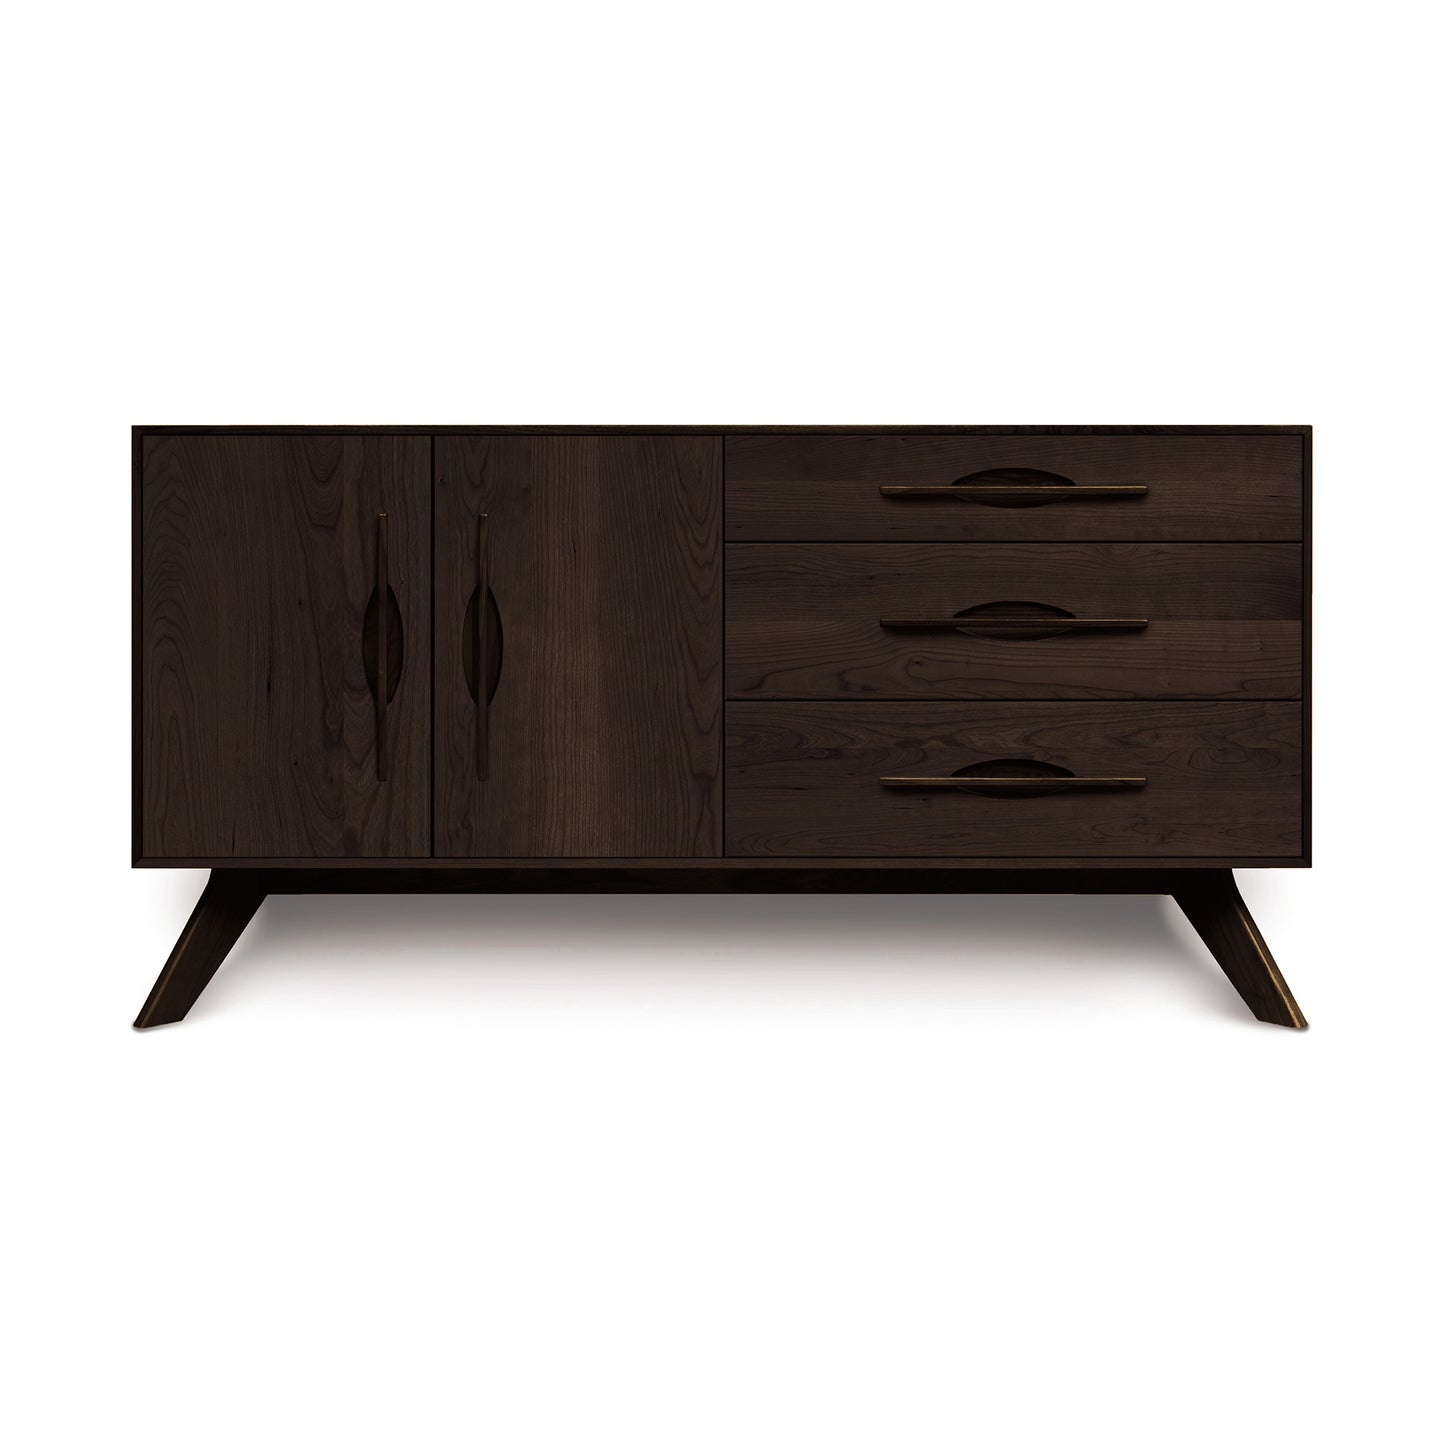 A modern wooden Copeland Furniture Audrey 2-Door 3-Drawer Buffet, with three drawers on the right and two doors on the left, set against a plain background.